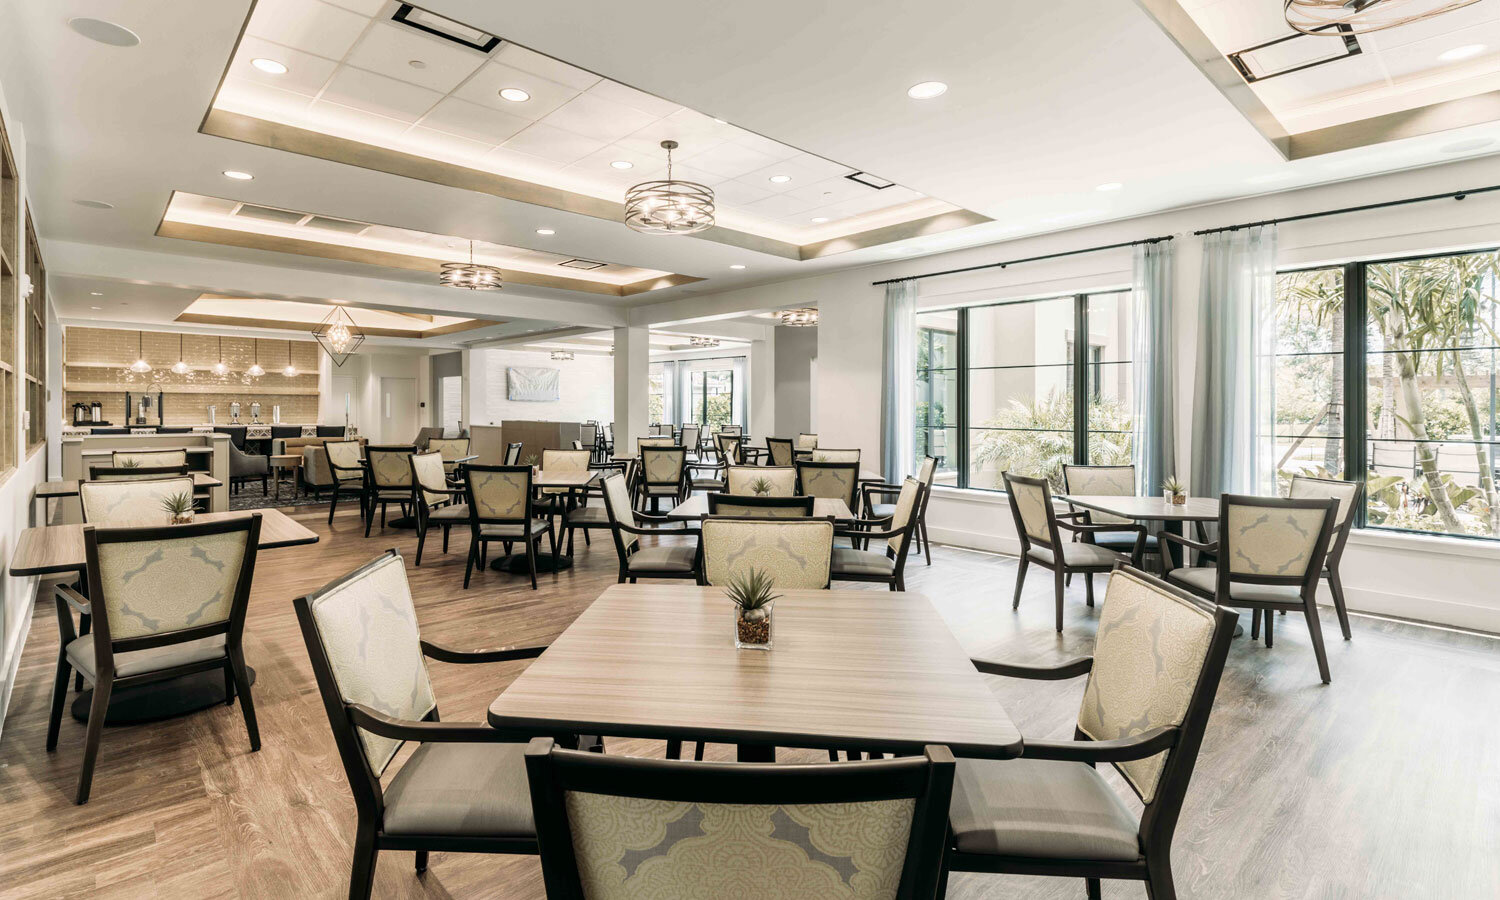 pi-architects-royal-palm-assisted-living-dining.jpg